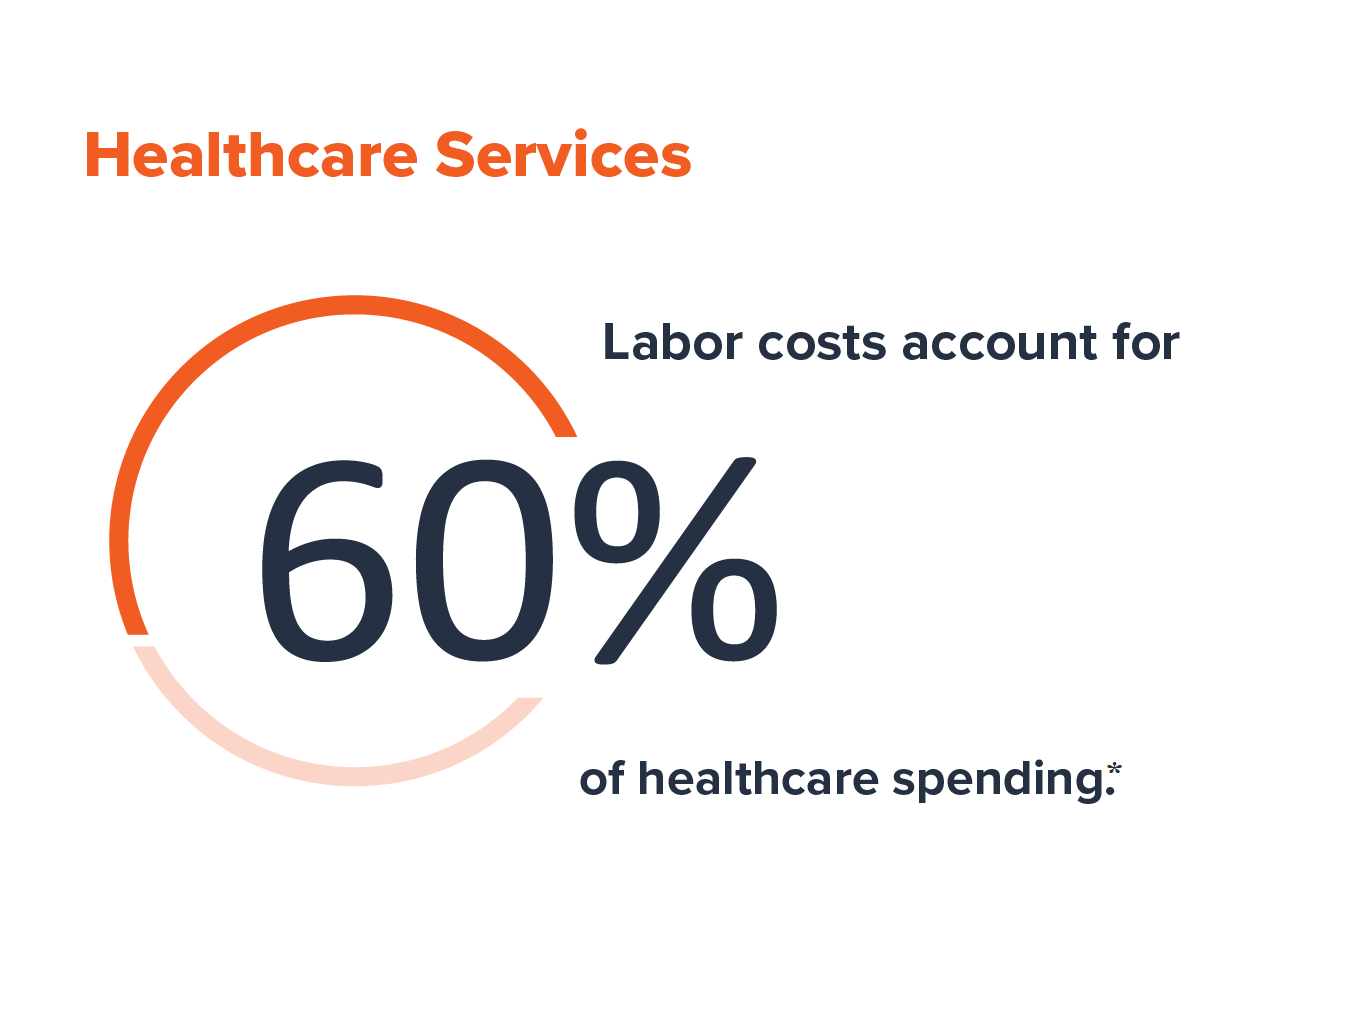 Challenges in the Healthcare Services Industry